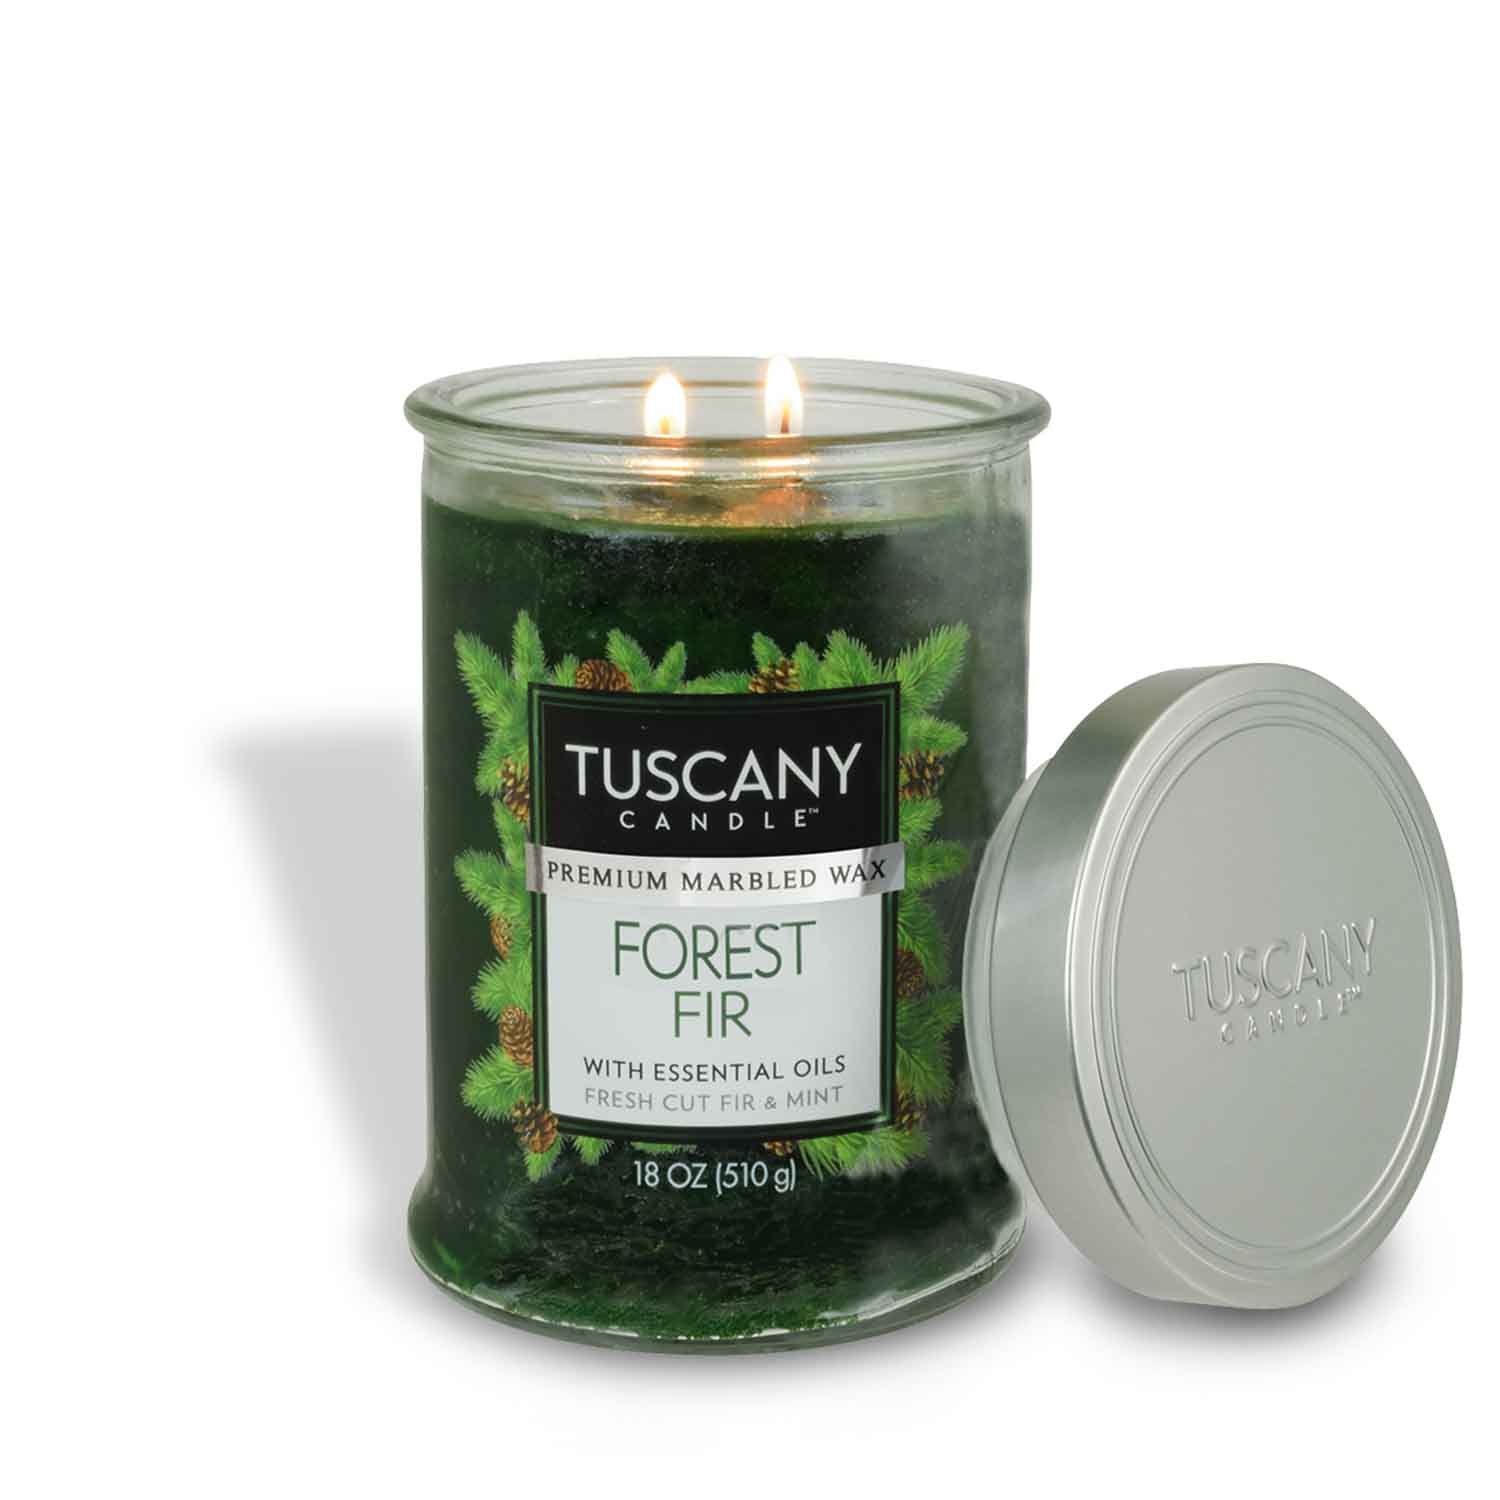 Tuscany Candle Candle, Fraser Fir - 1 candle, 18 oz